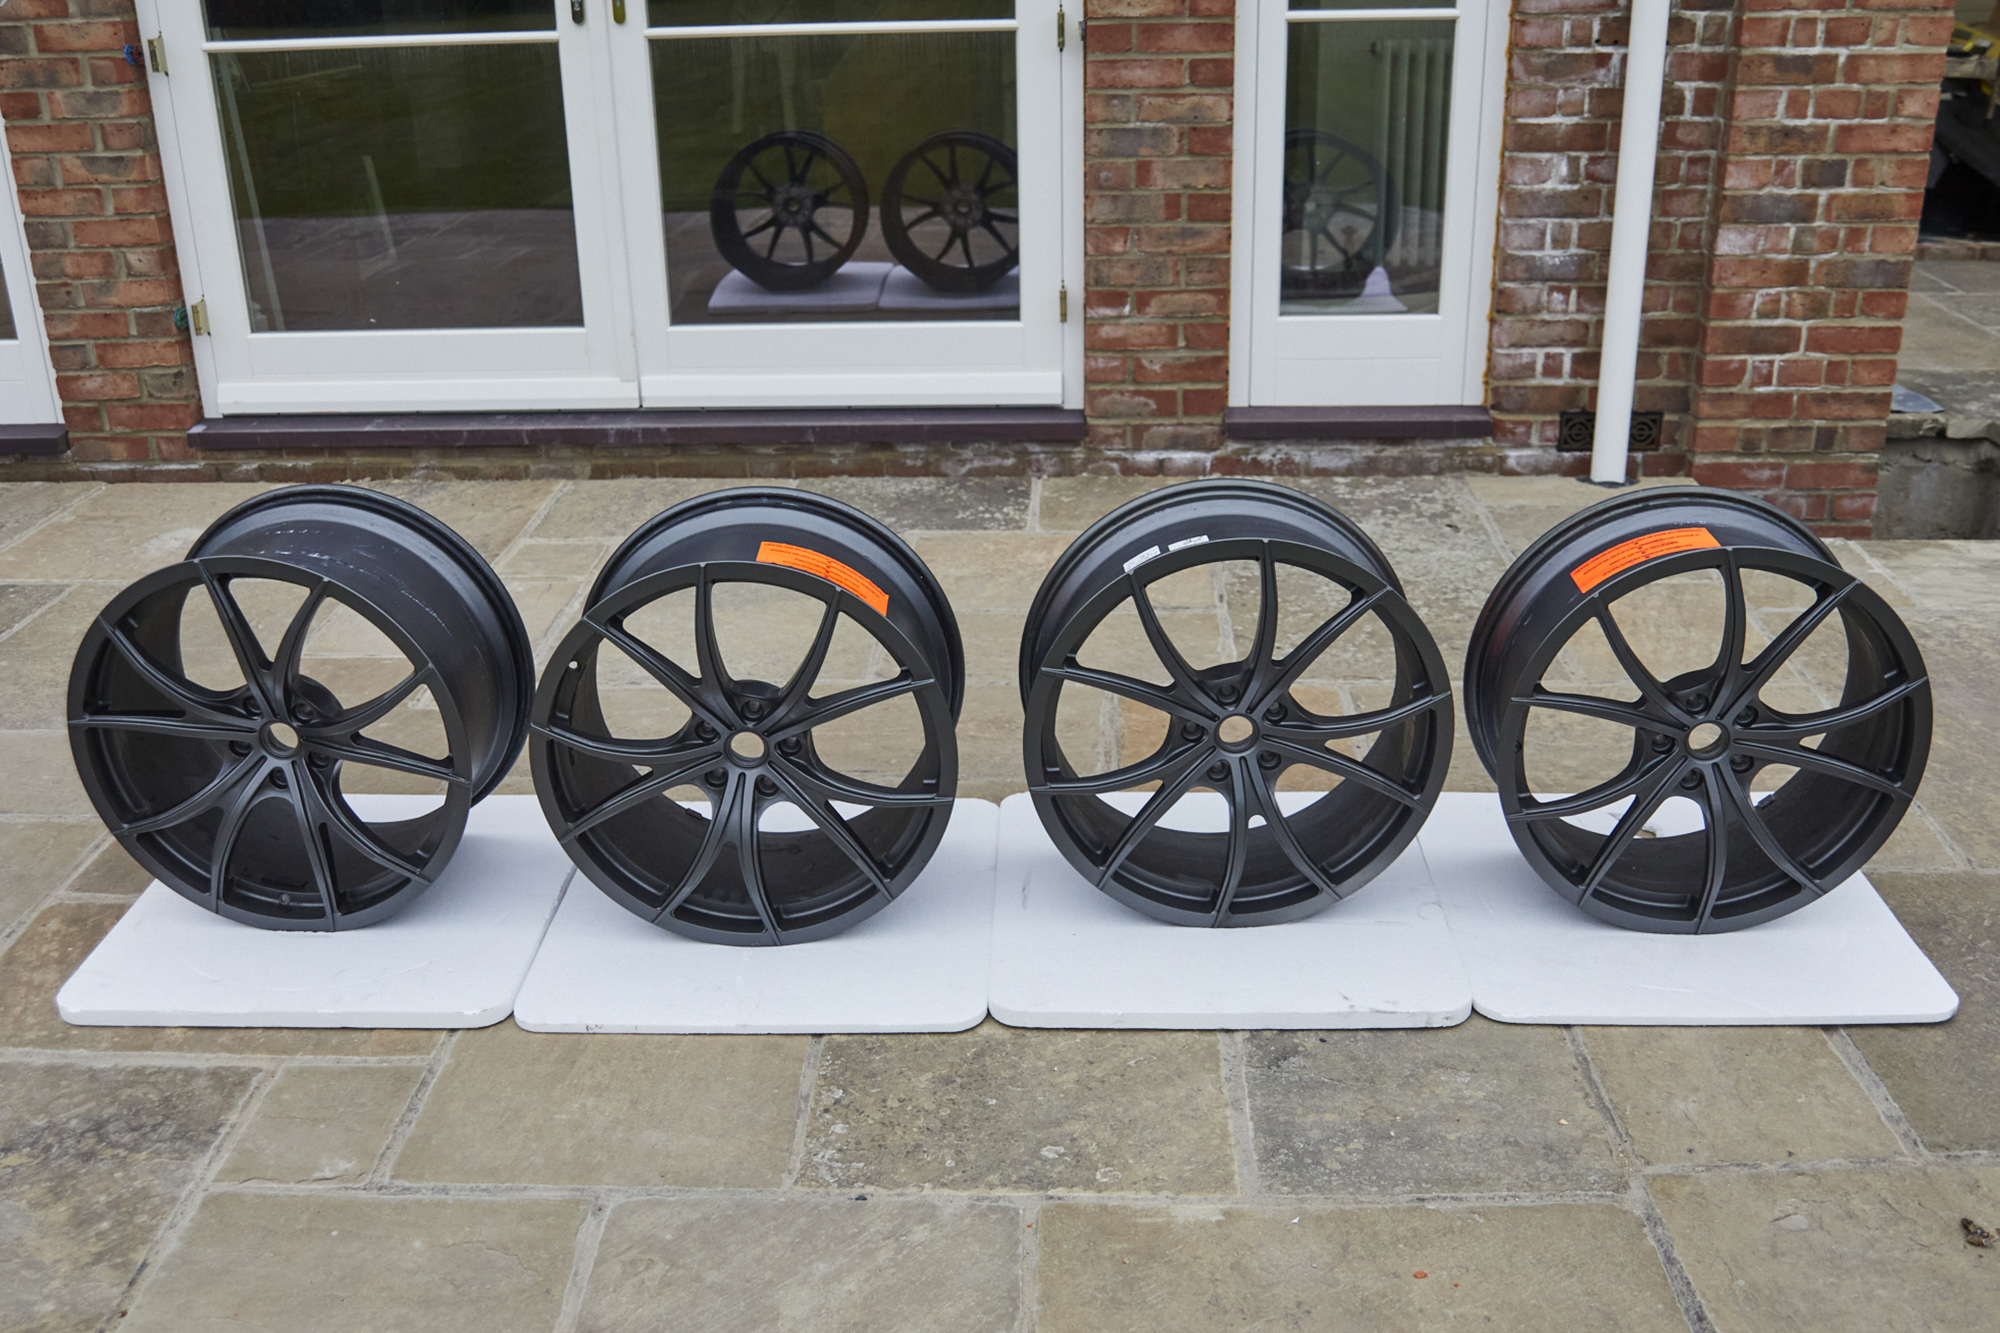 SET OF FERRARI 458 WHEELS for sale by auction in Colchester, Essex 